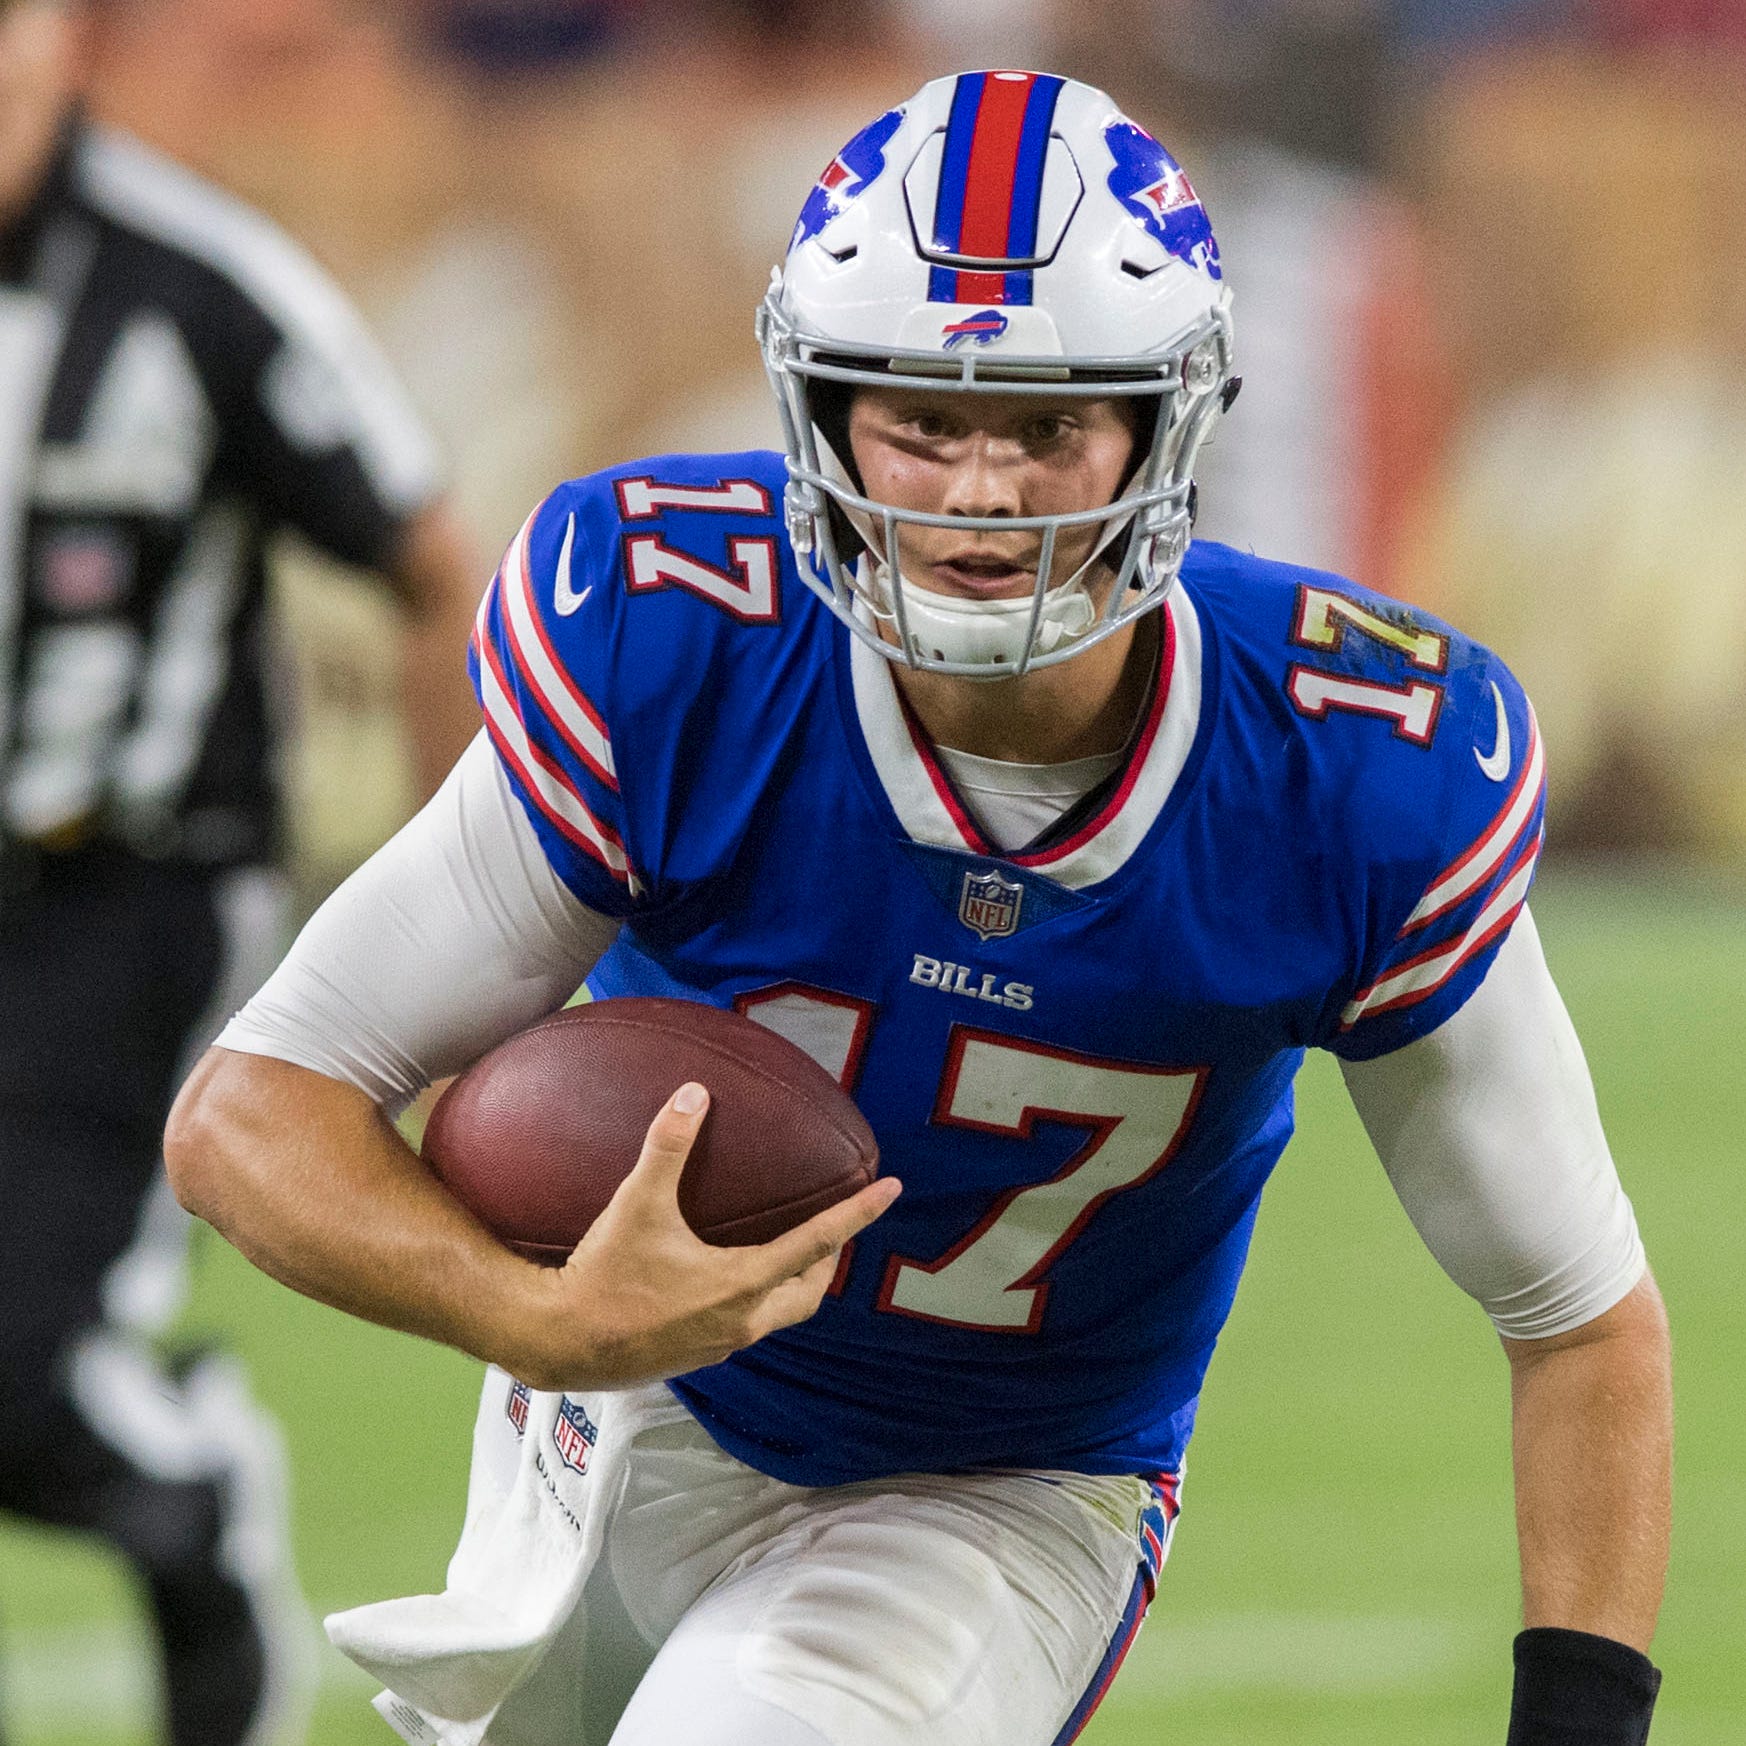 Josh Allen runs with the ball against the Browns.